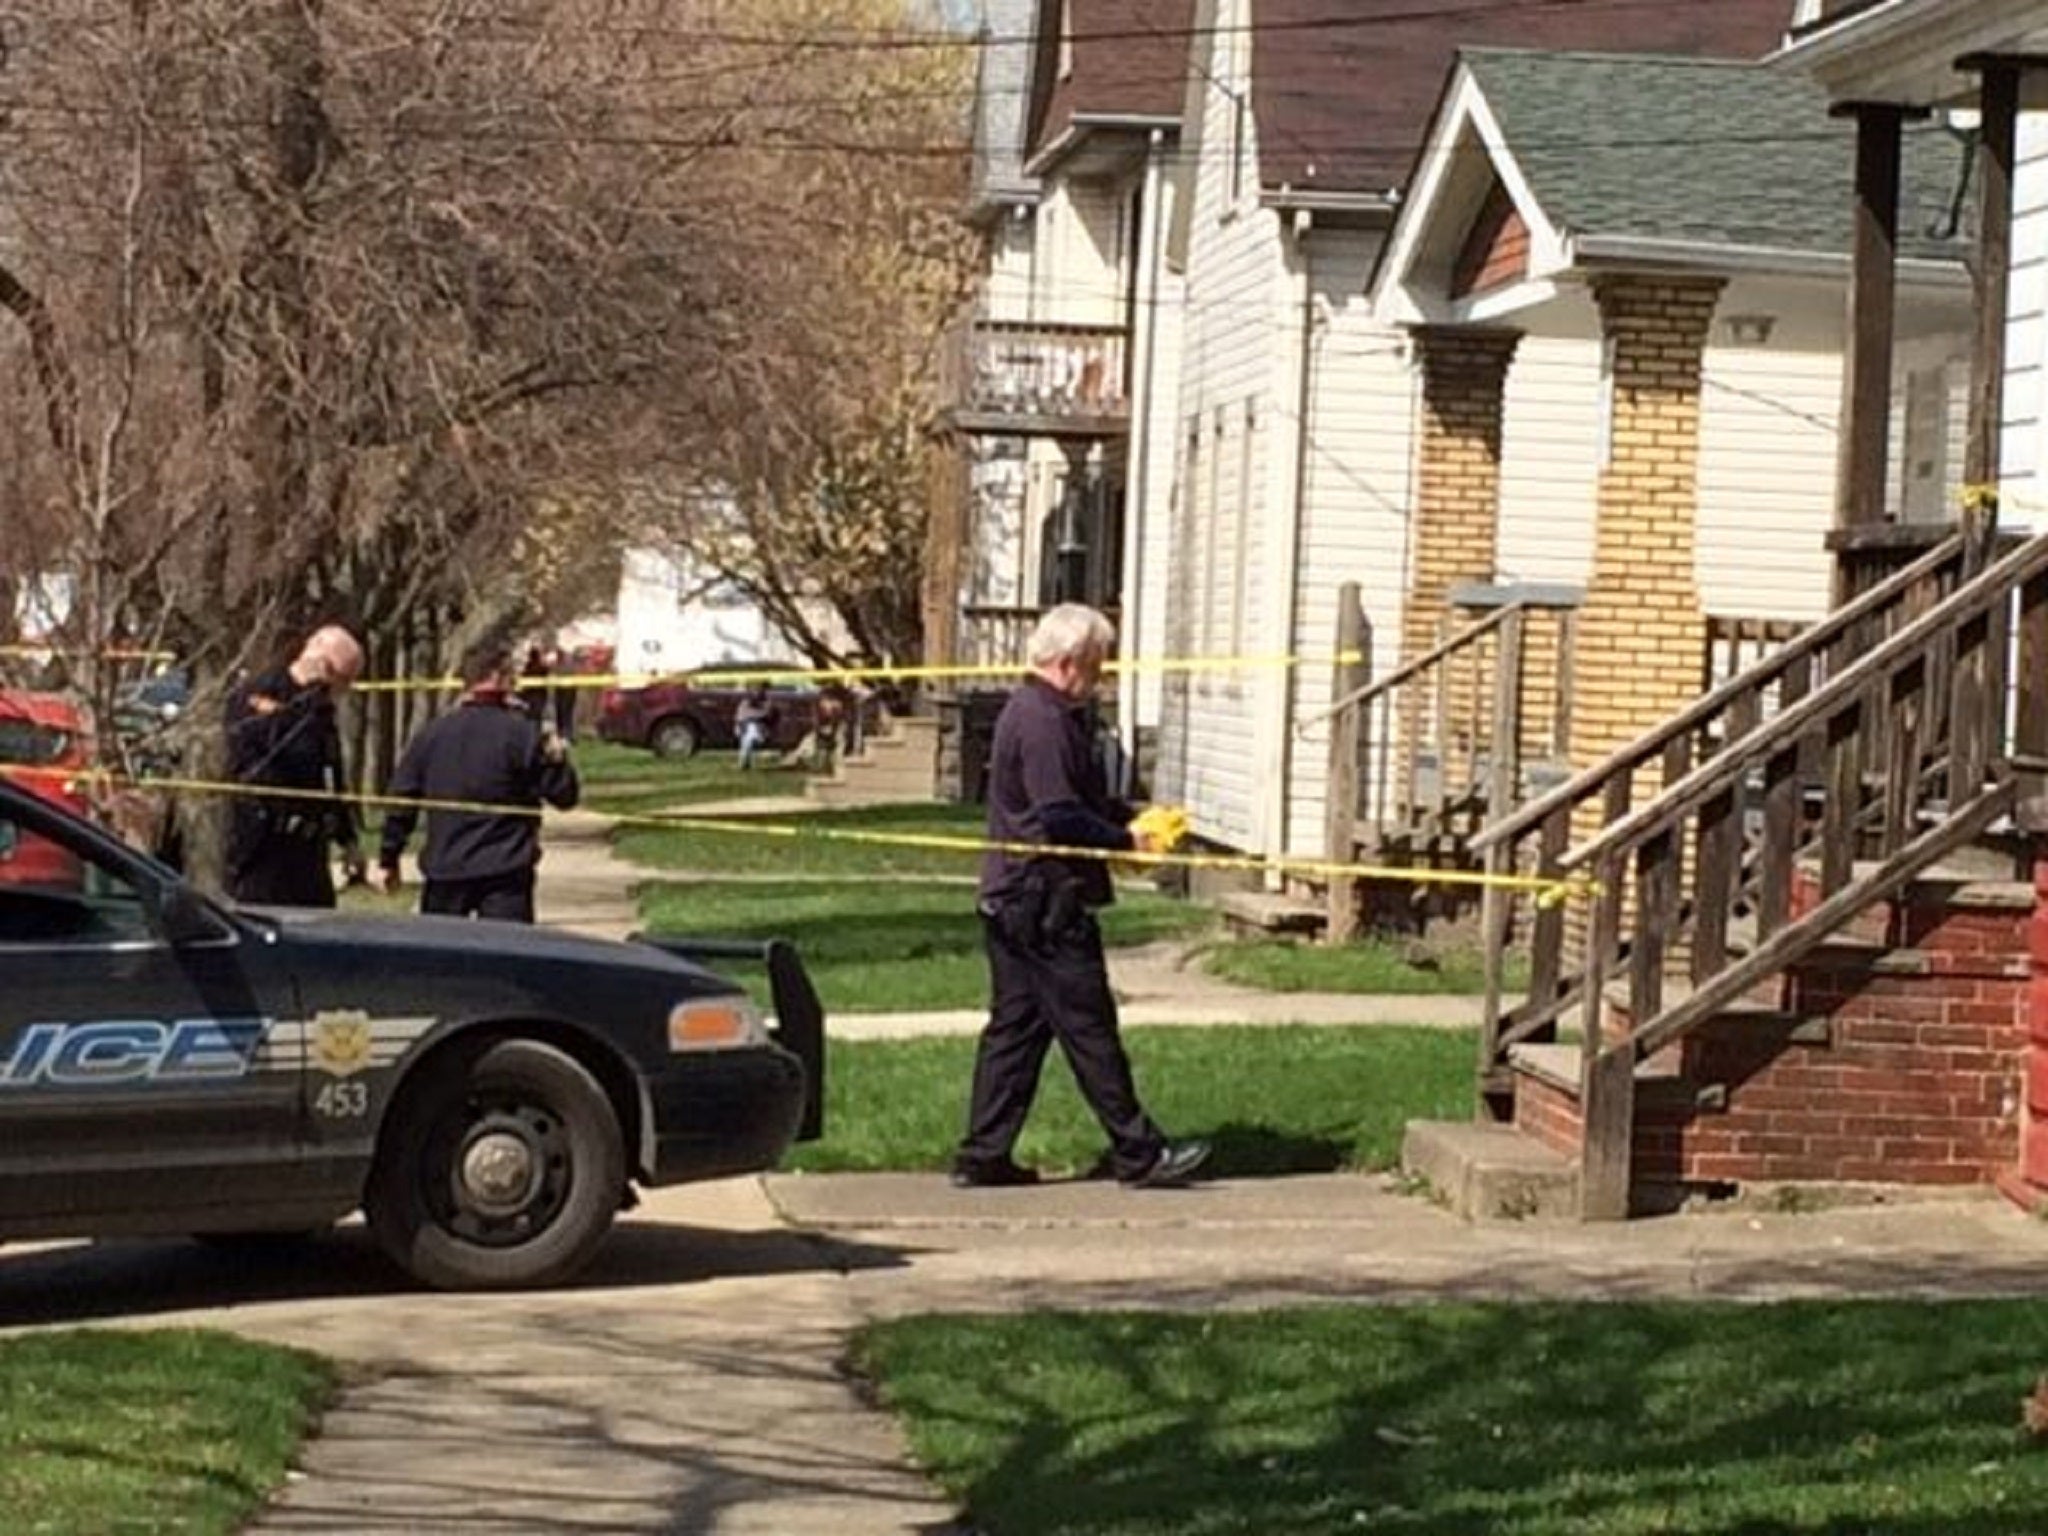 Authorities investigate the scene after a shooting involving two children on Sunday April 12, 2015